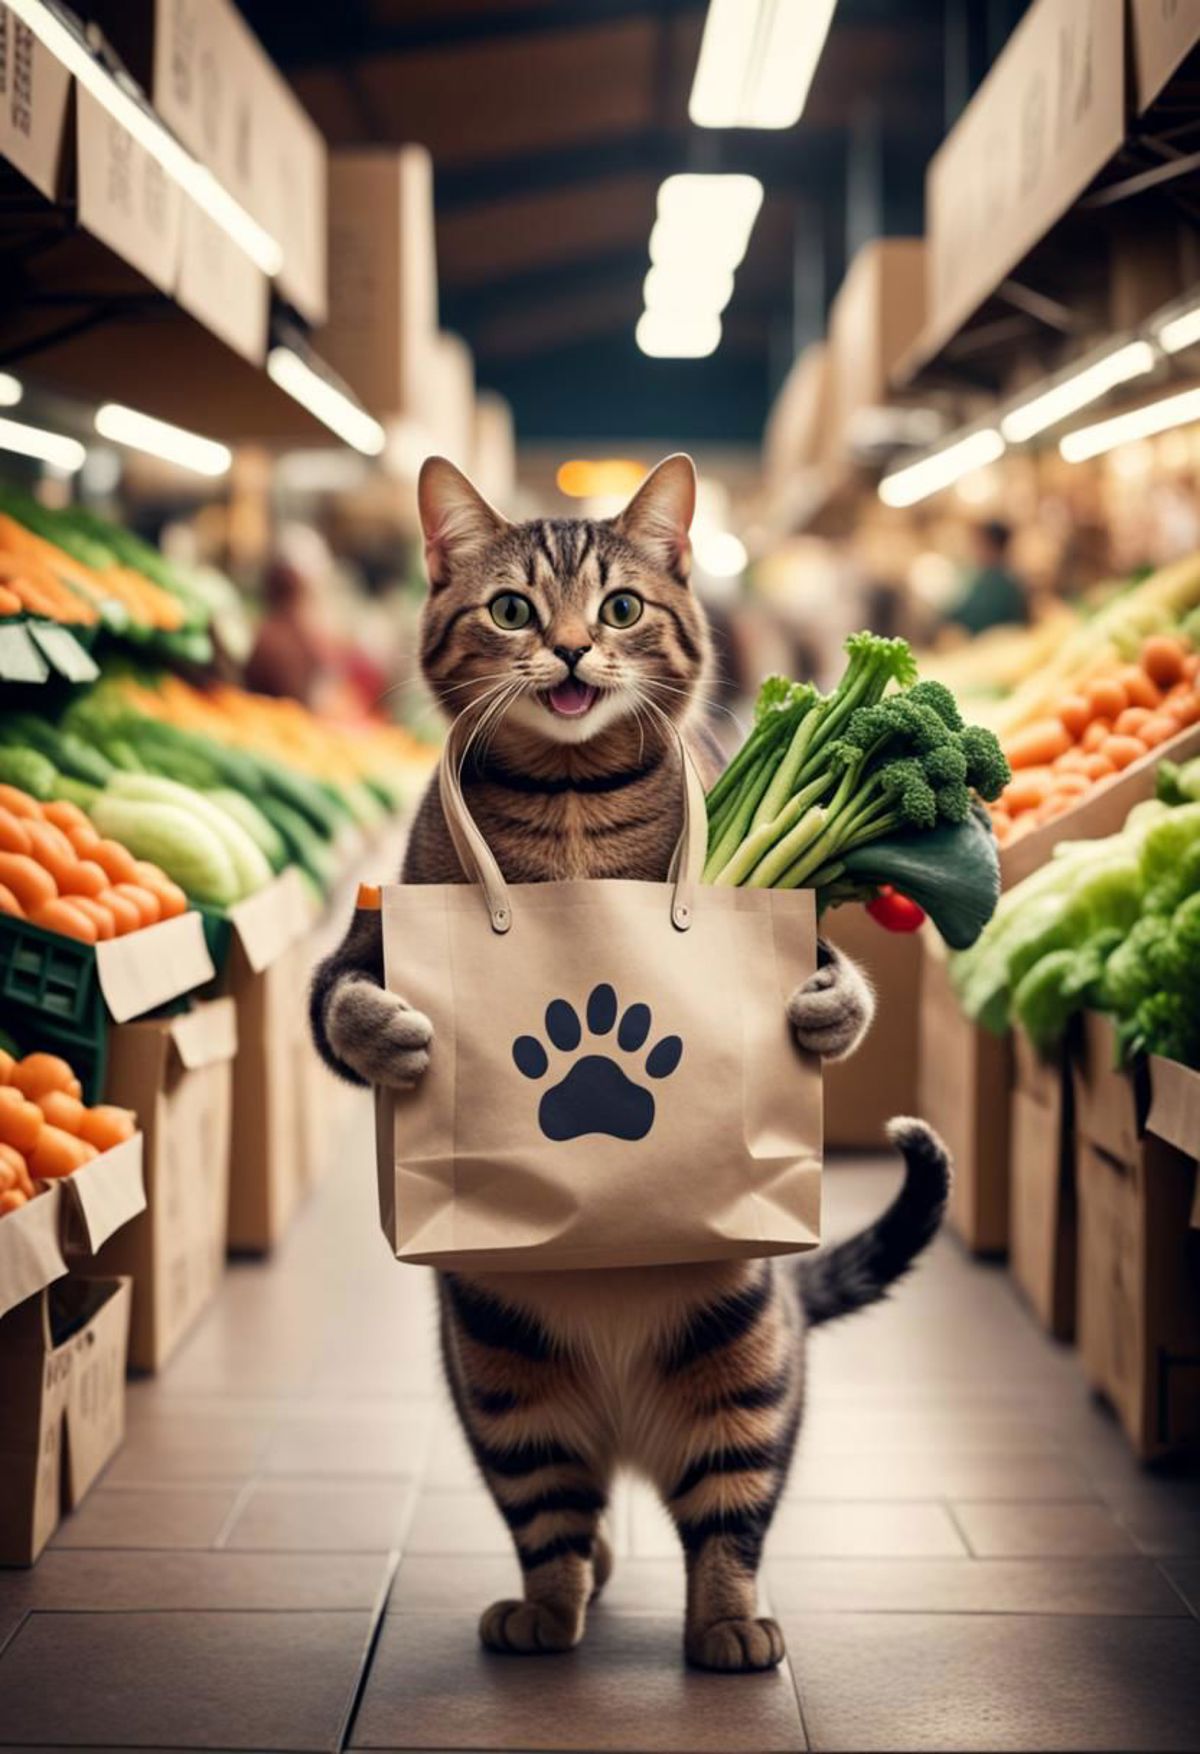 A cat holding a bag with a paw on it.